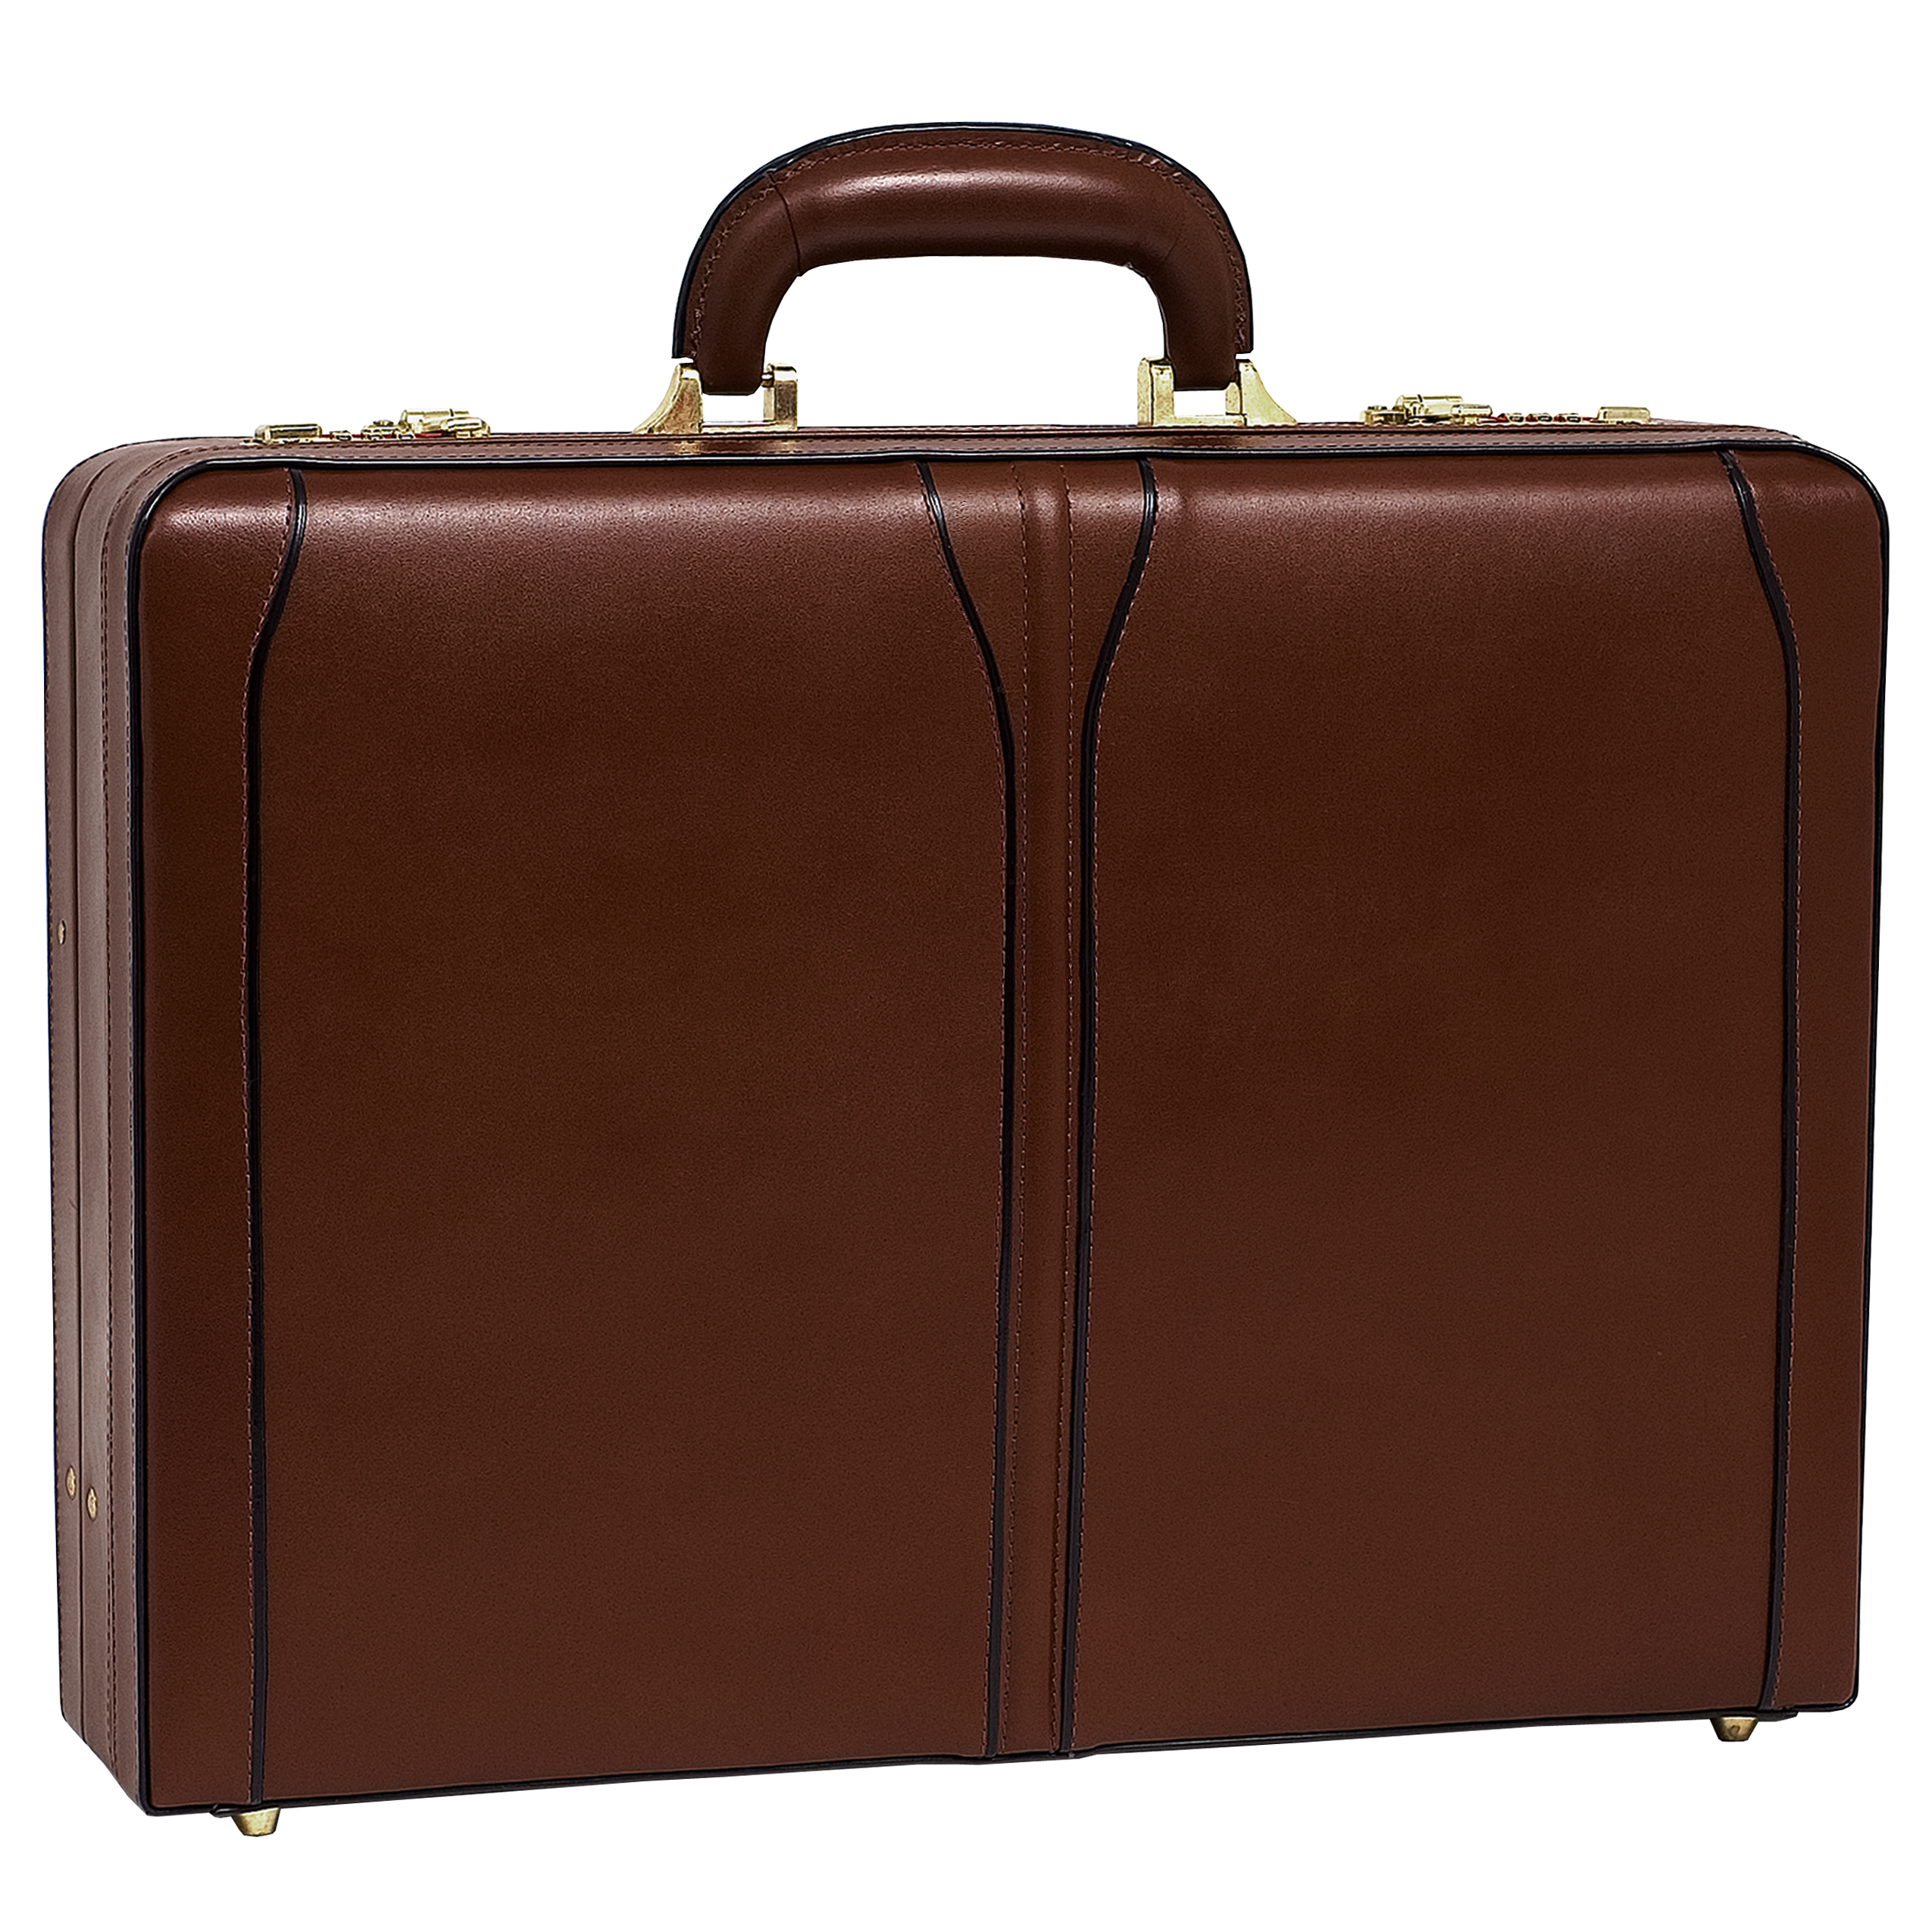 Mcklein Turner 80484 Brown Leather Expandable Attache Case